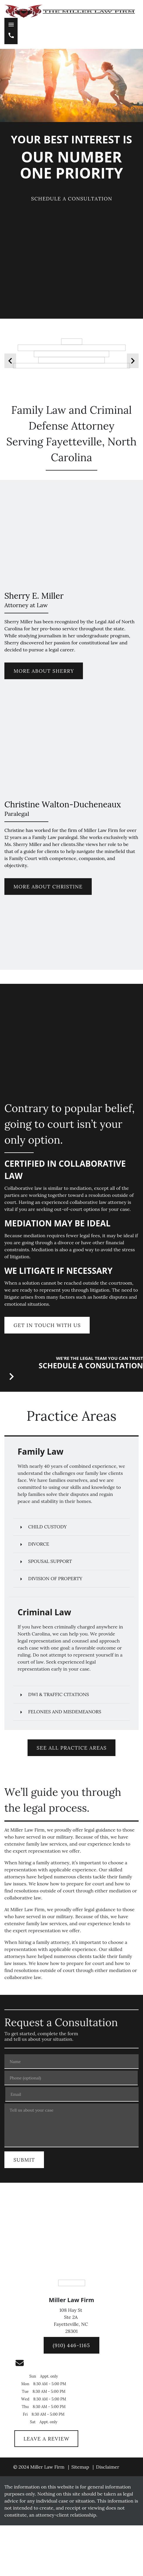 Miller & Illikainen, Attorneys & Counselors at Law - Fayetteville NC Lawyers